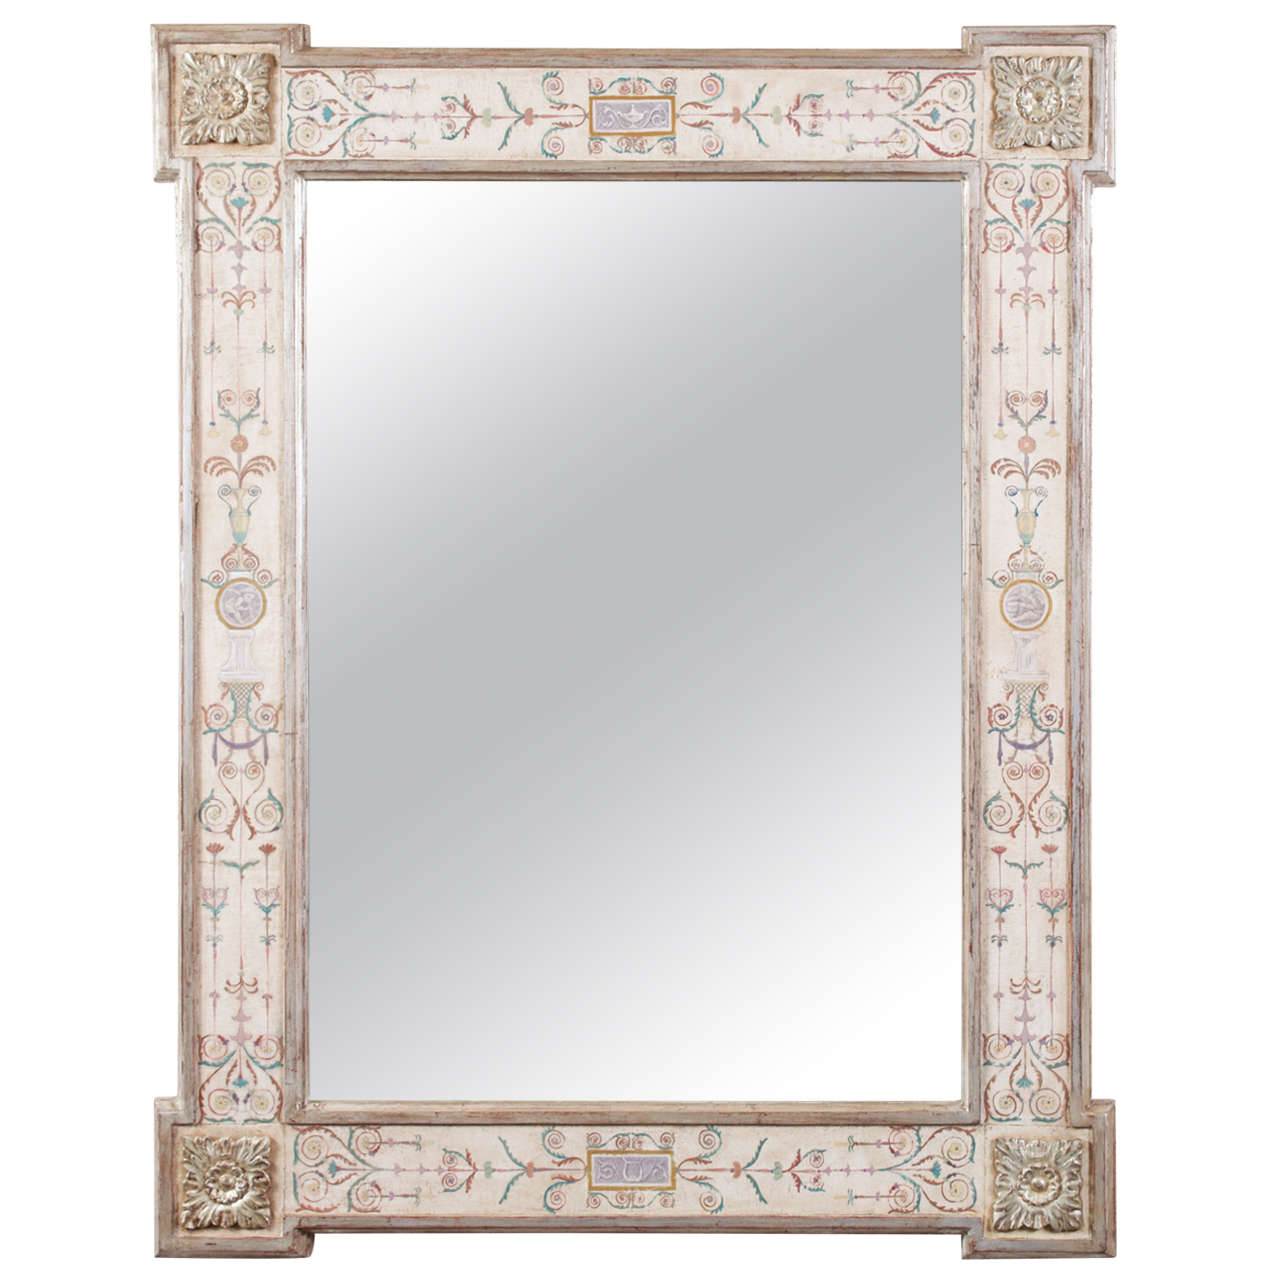 Hand-Painted Neoclassical "Pompeii" Mirror